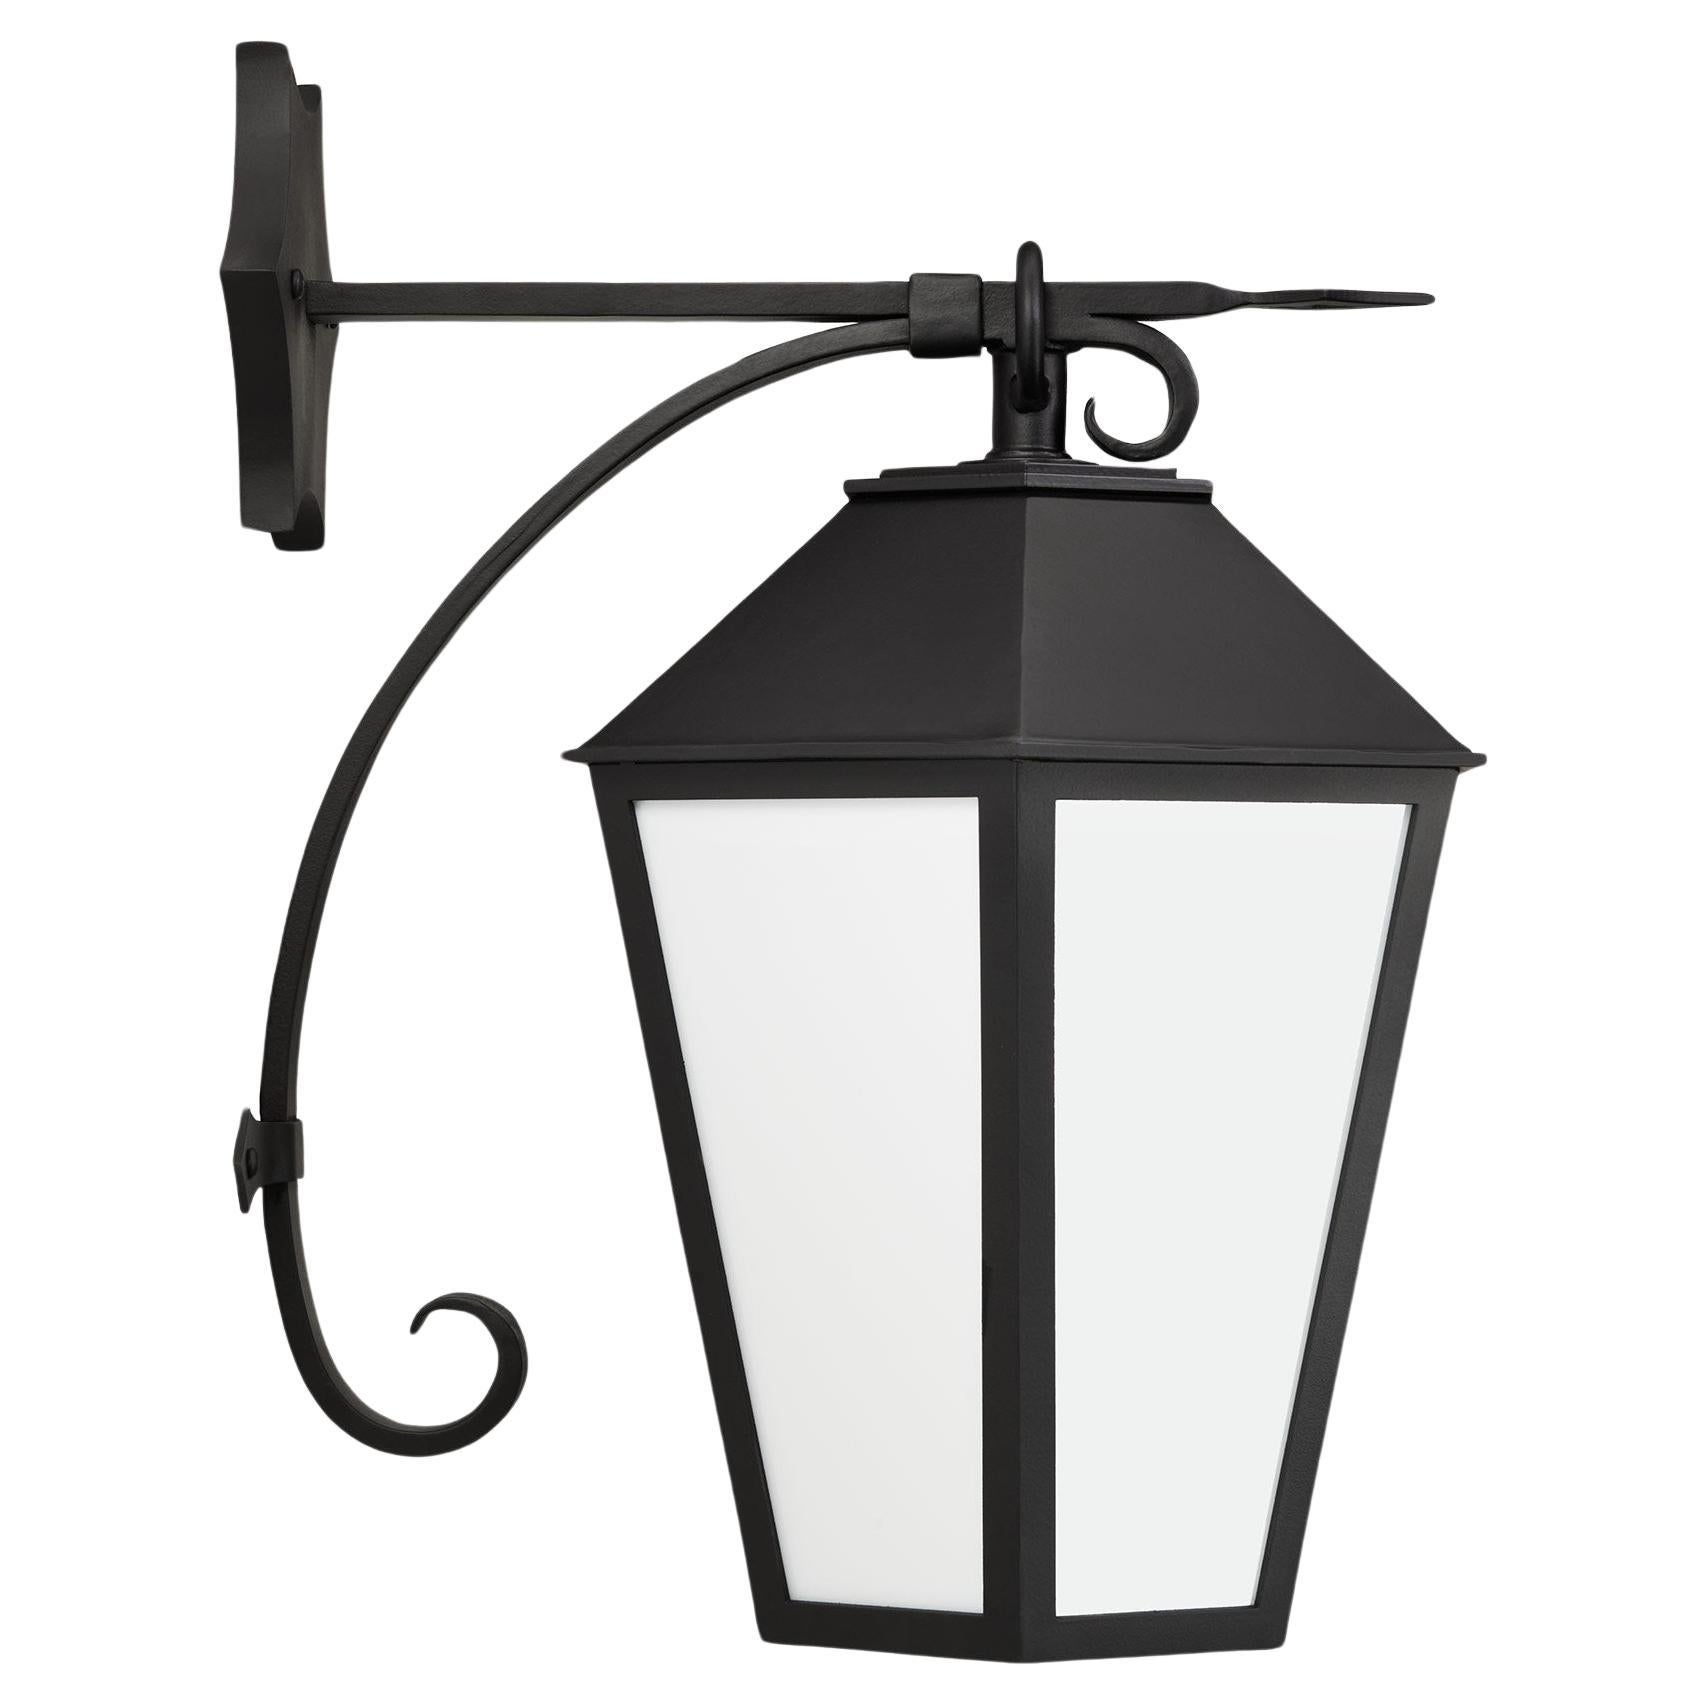 This Heirloom Quality Lantern designed by Architect Anthony Grumbine features a classic tapered form, dramatic curved arm and star detailing, this large hexagonal fixture is striking in numerous exterior, as well as interior, settings and